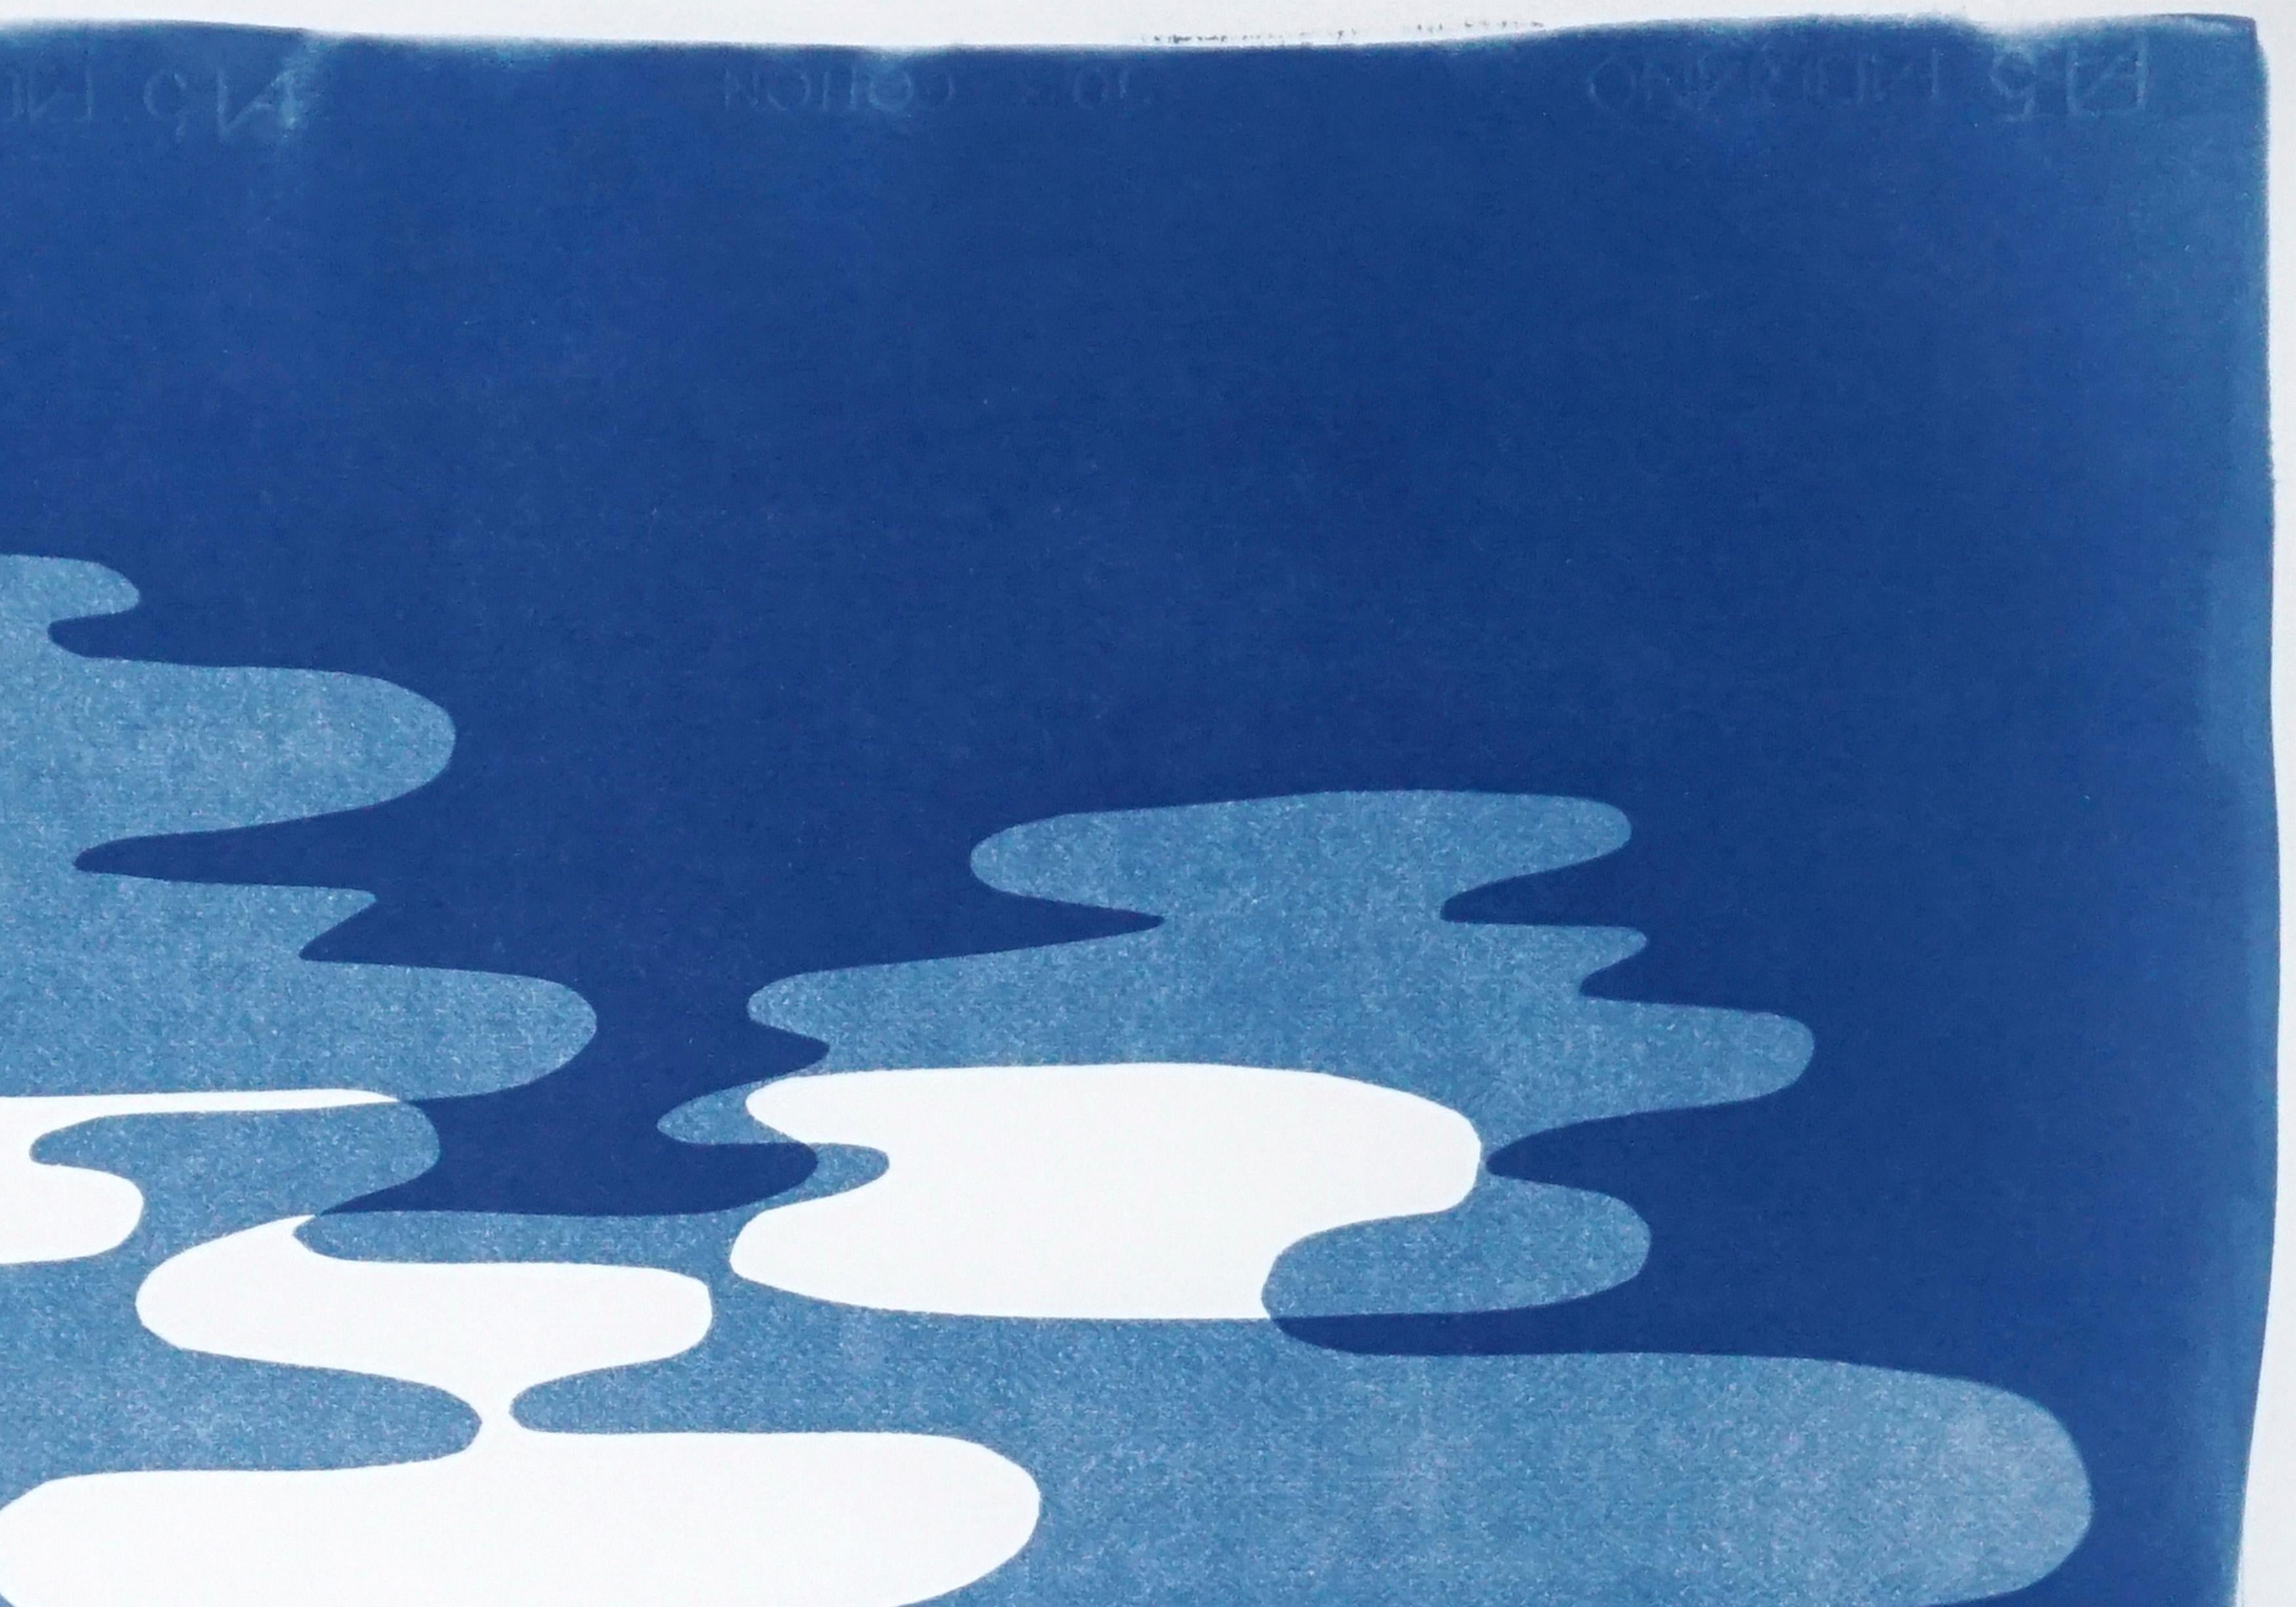 Hazy Blue Smoke, Artisan Cyanotype in Blue and White, Minimal Shapes on Paper - Abstract Geometric Print by Kind of Cyan